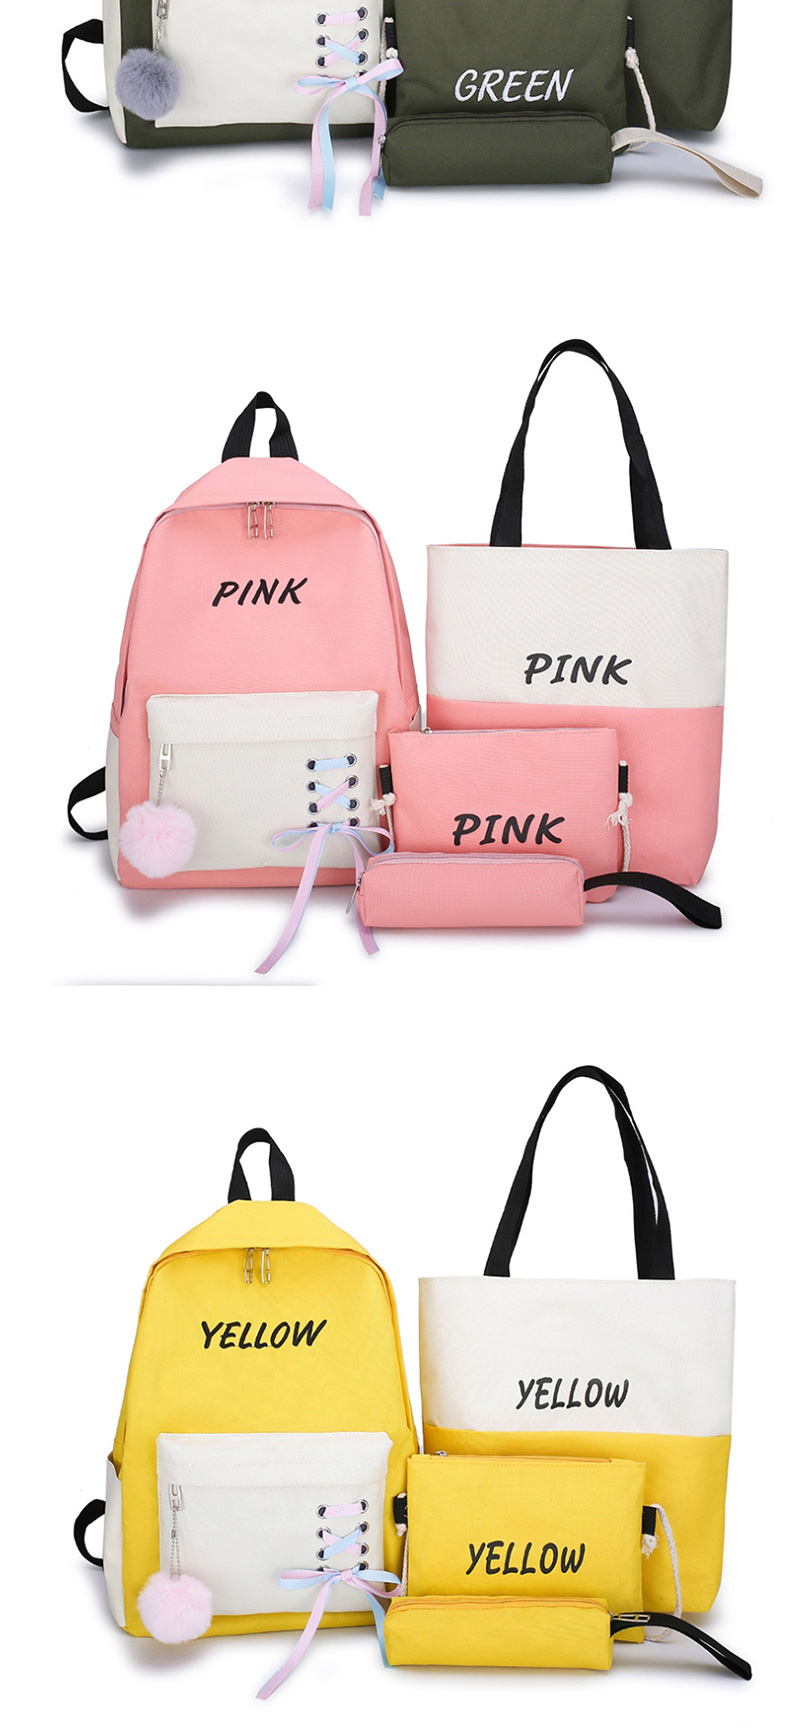 Fashion Pink Contrast Four-piece Backpack With Contrast Straps,Backpack